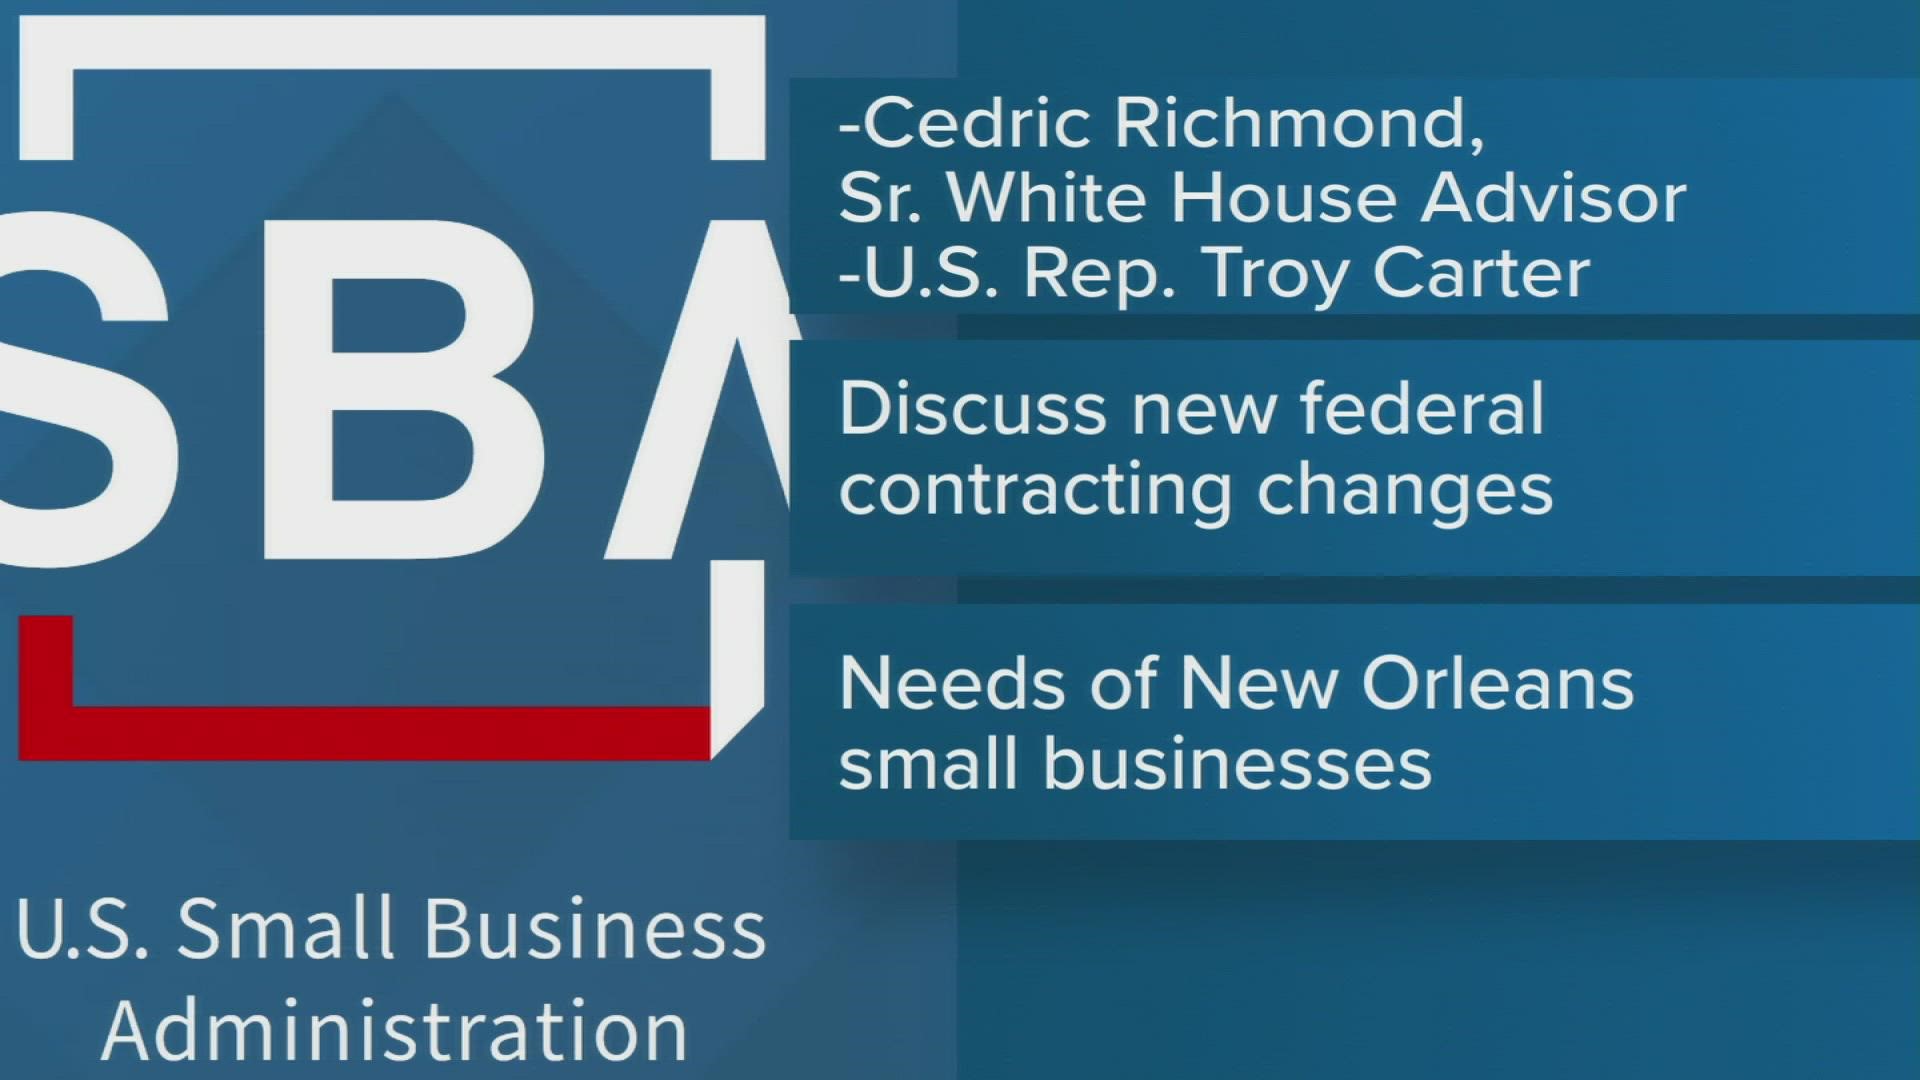 The Small Business Administration will discuss the needs of New Orleans small businesses